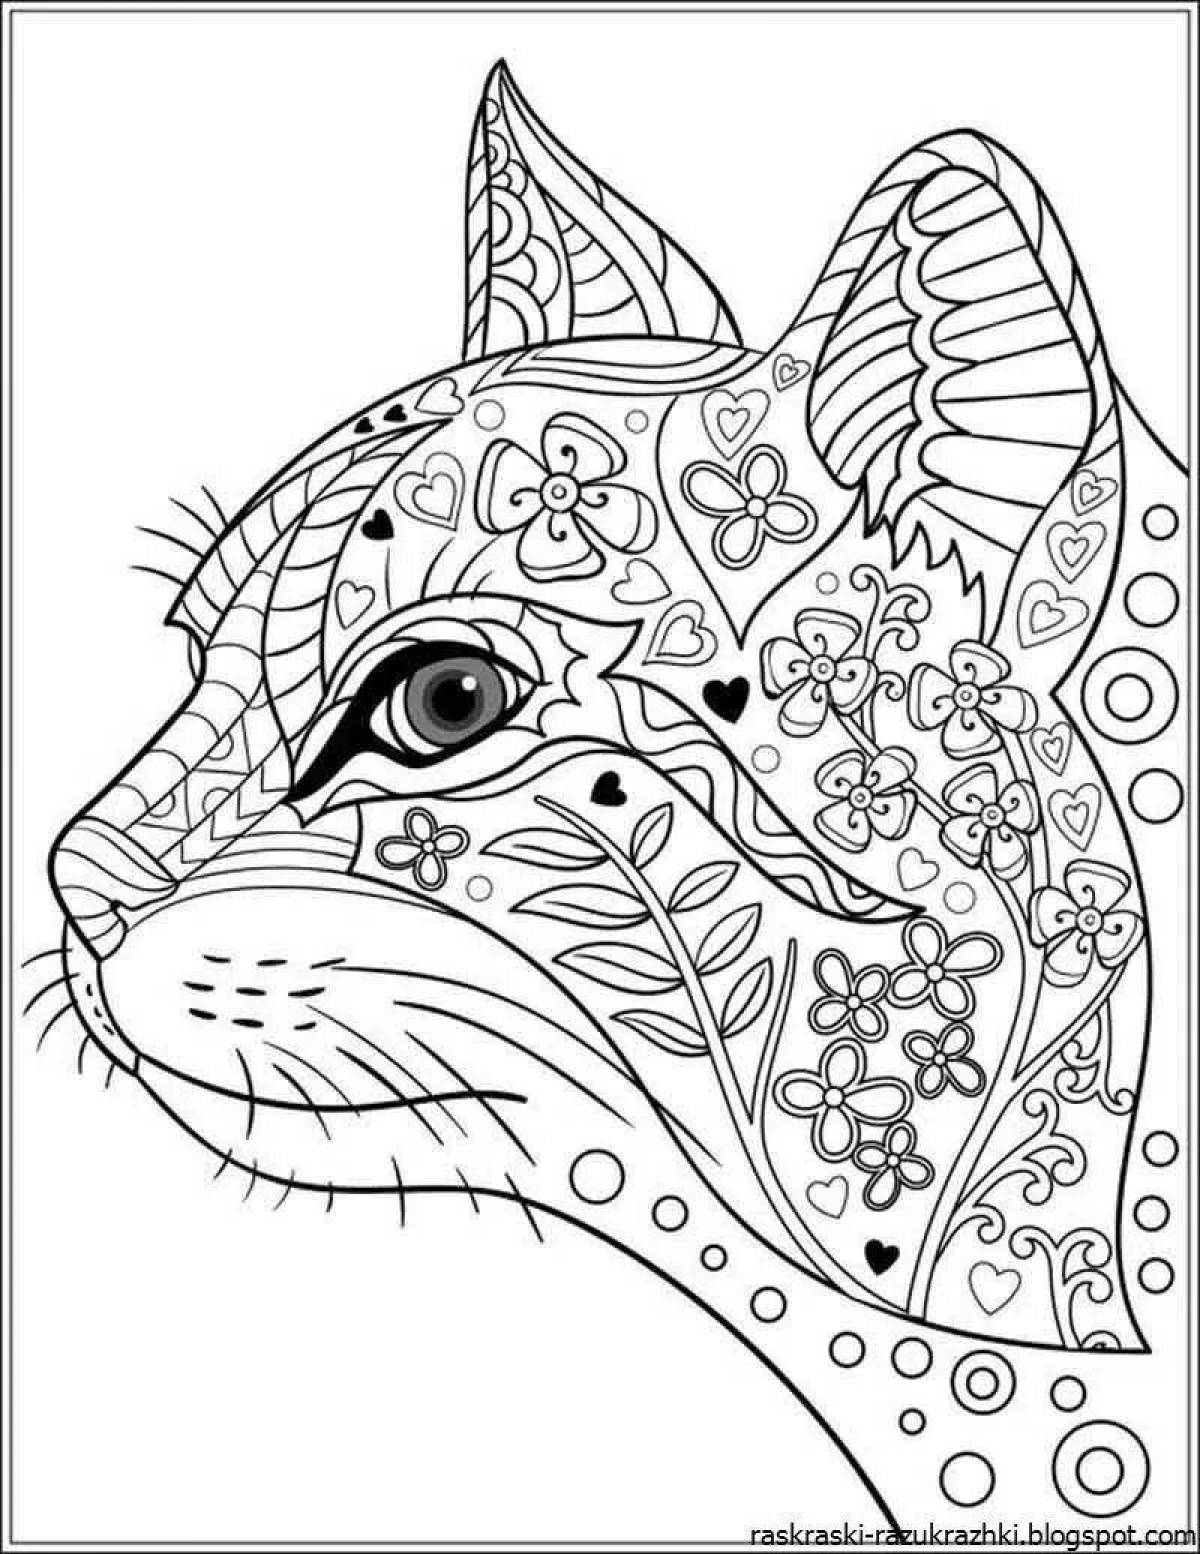 Funny animal coloring pages for kids 10-12 years old